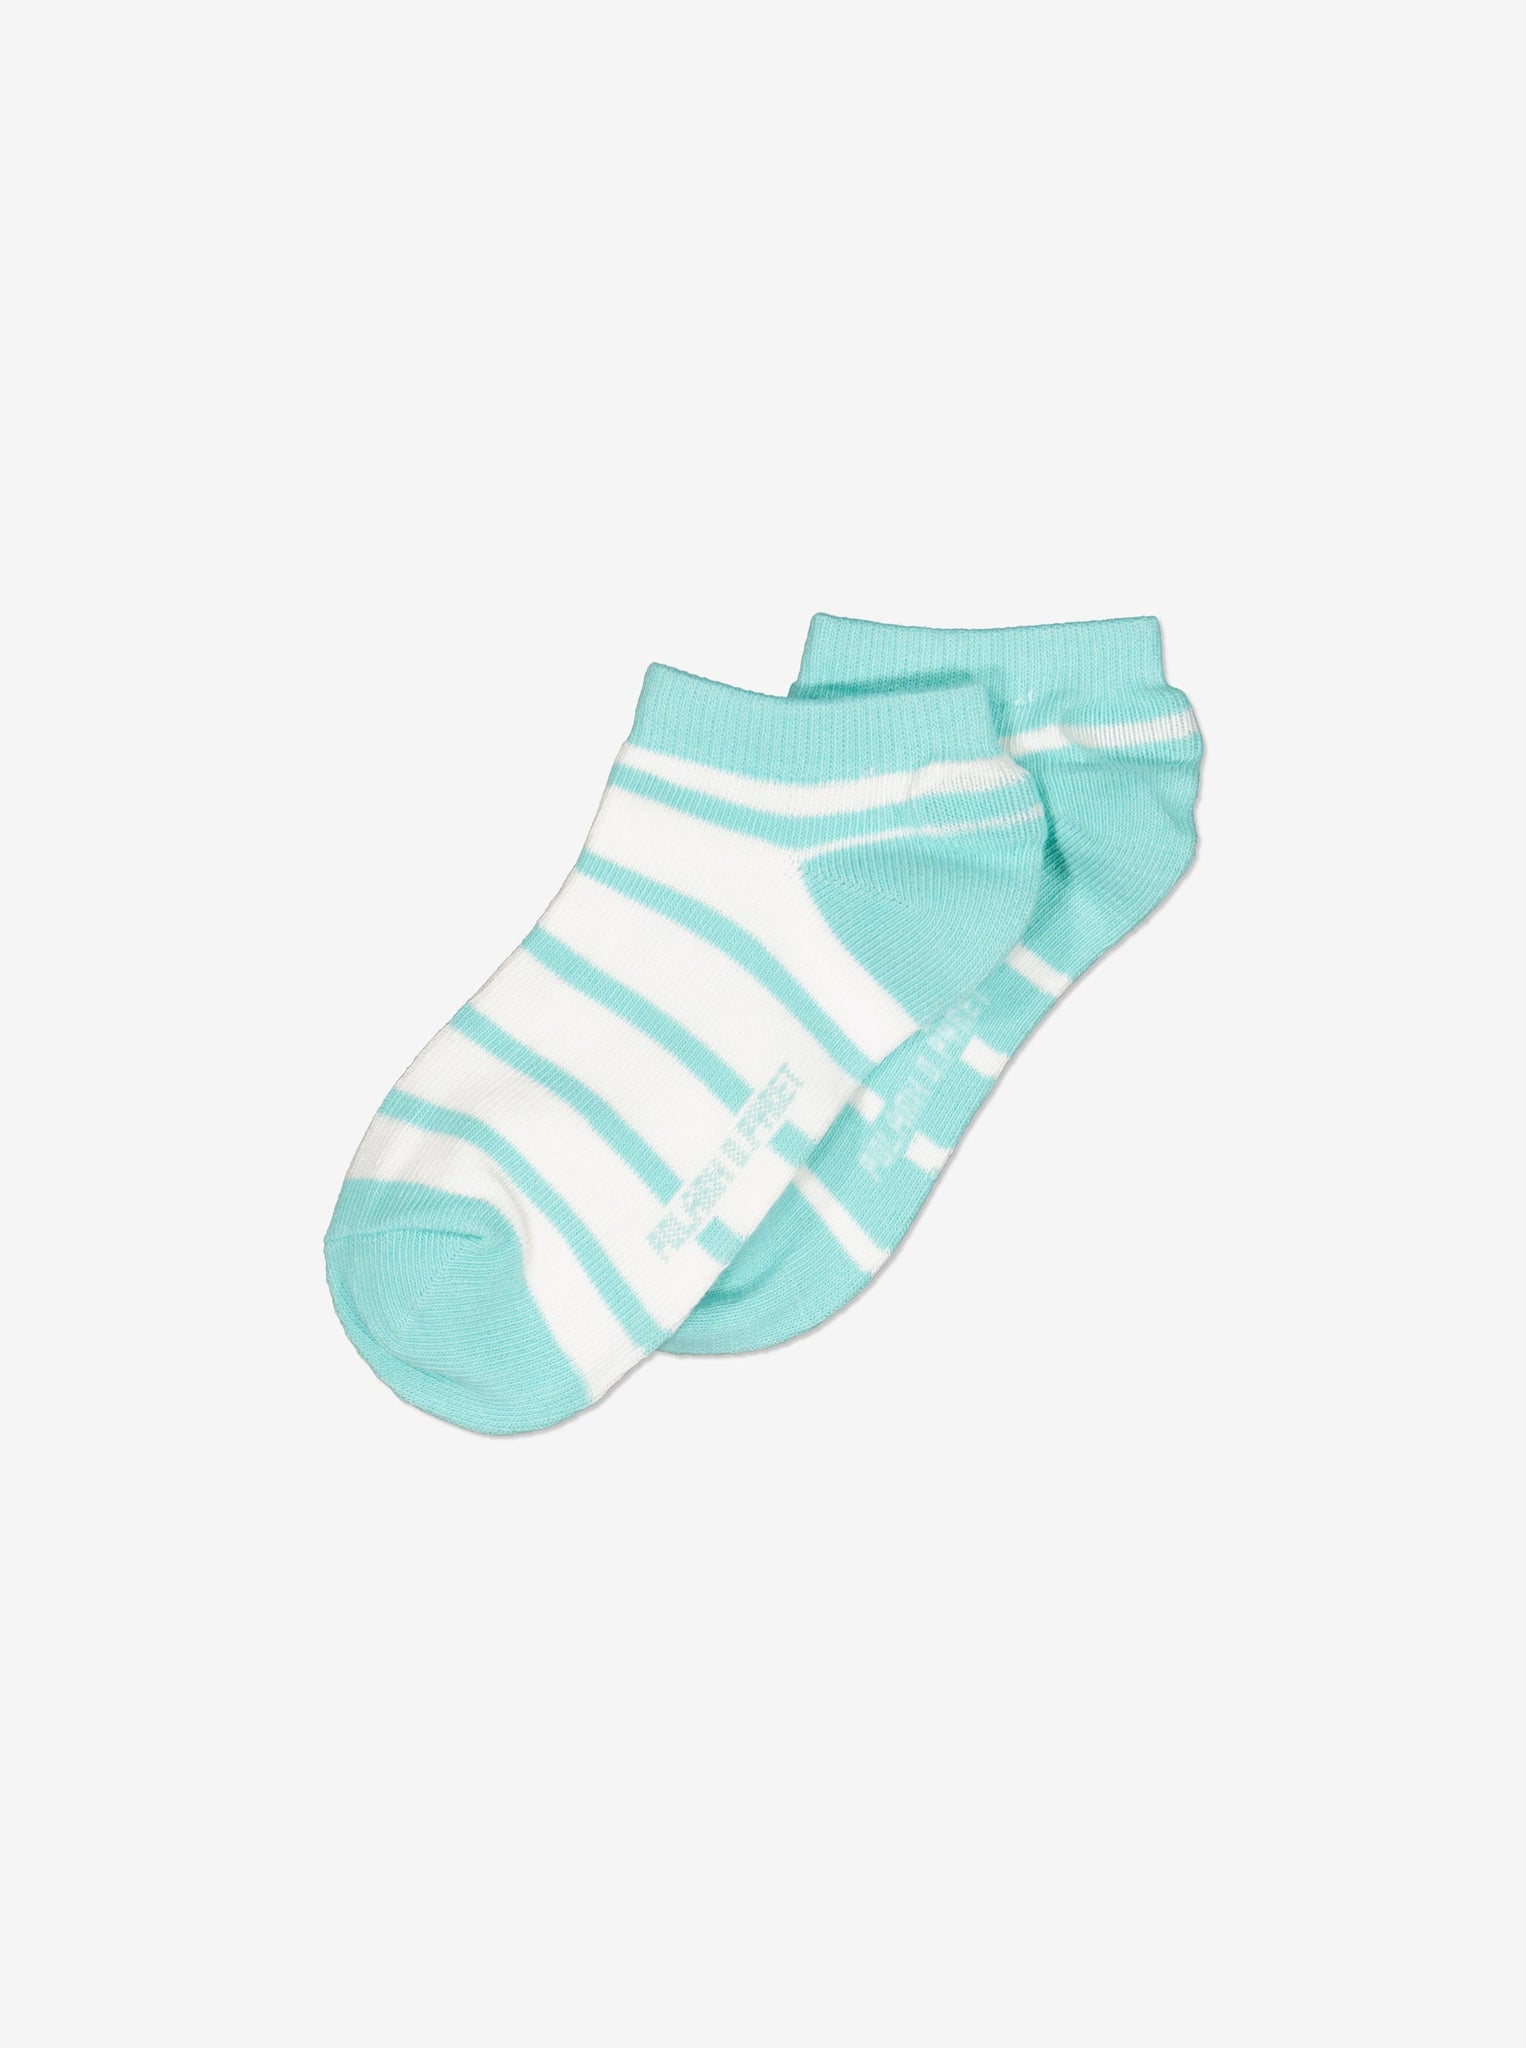 Blue Kids Trainer Socks from Polarn O. Pyret Kidswear. Made using environmentally friendly materials.